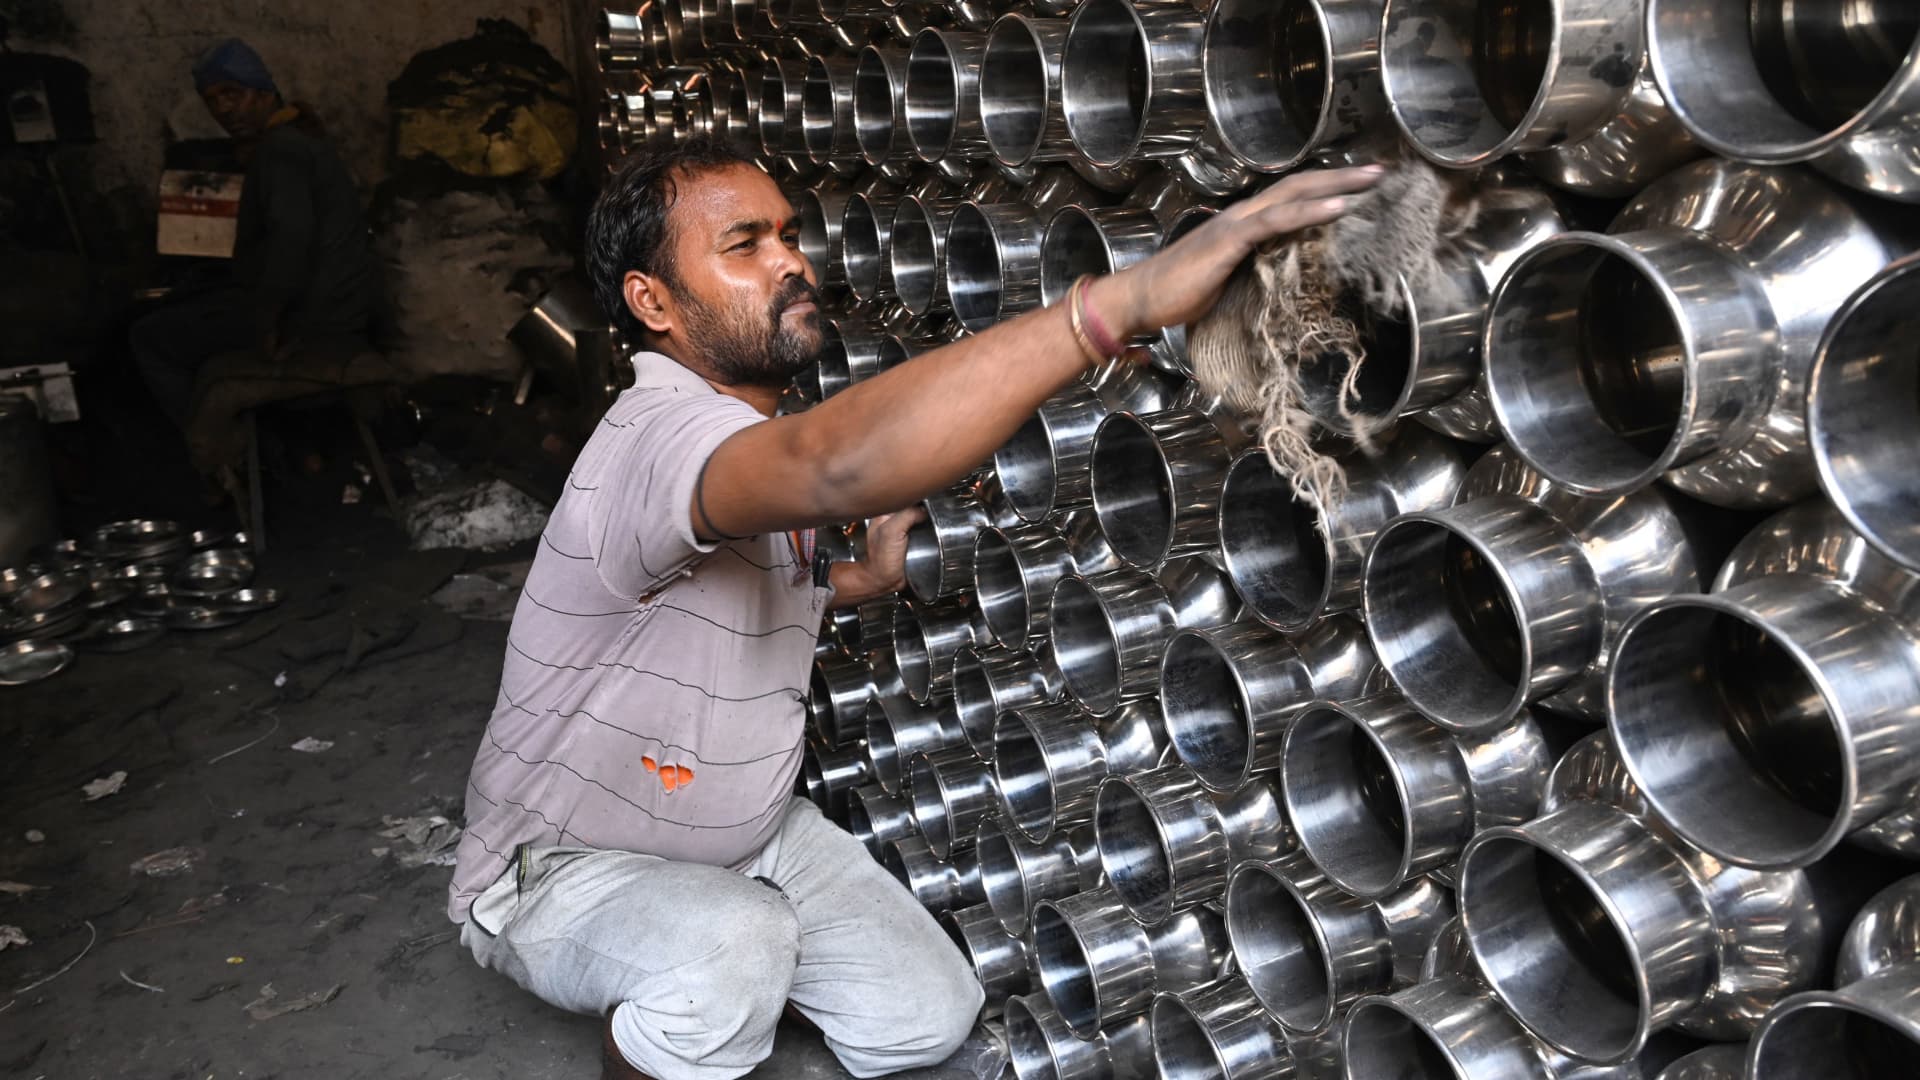 A laborer working at a stainless steel utensil workshop in Chennai on April 30, 2022.